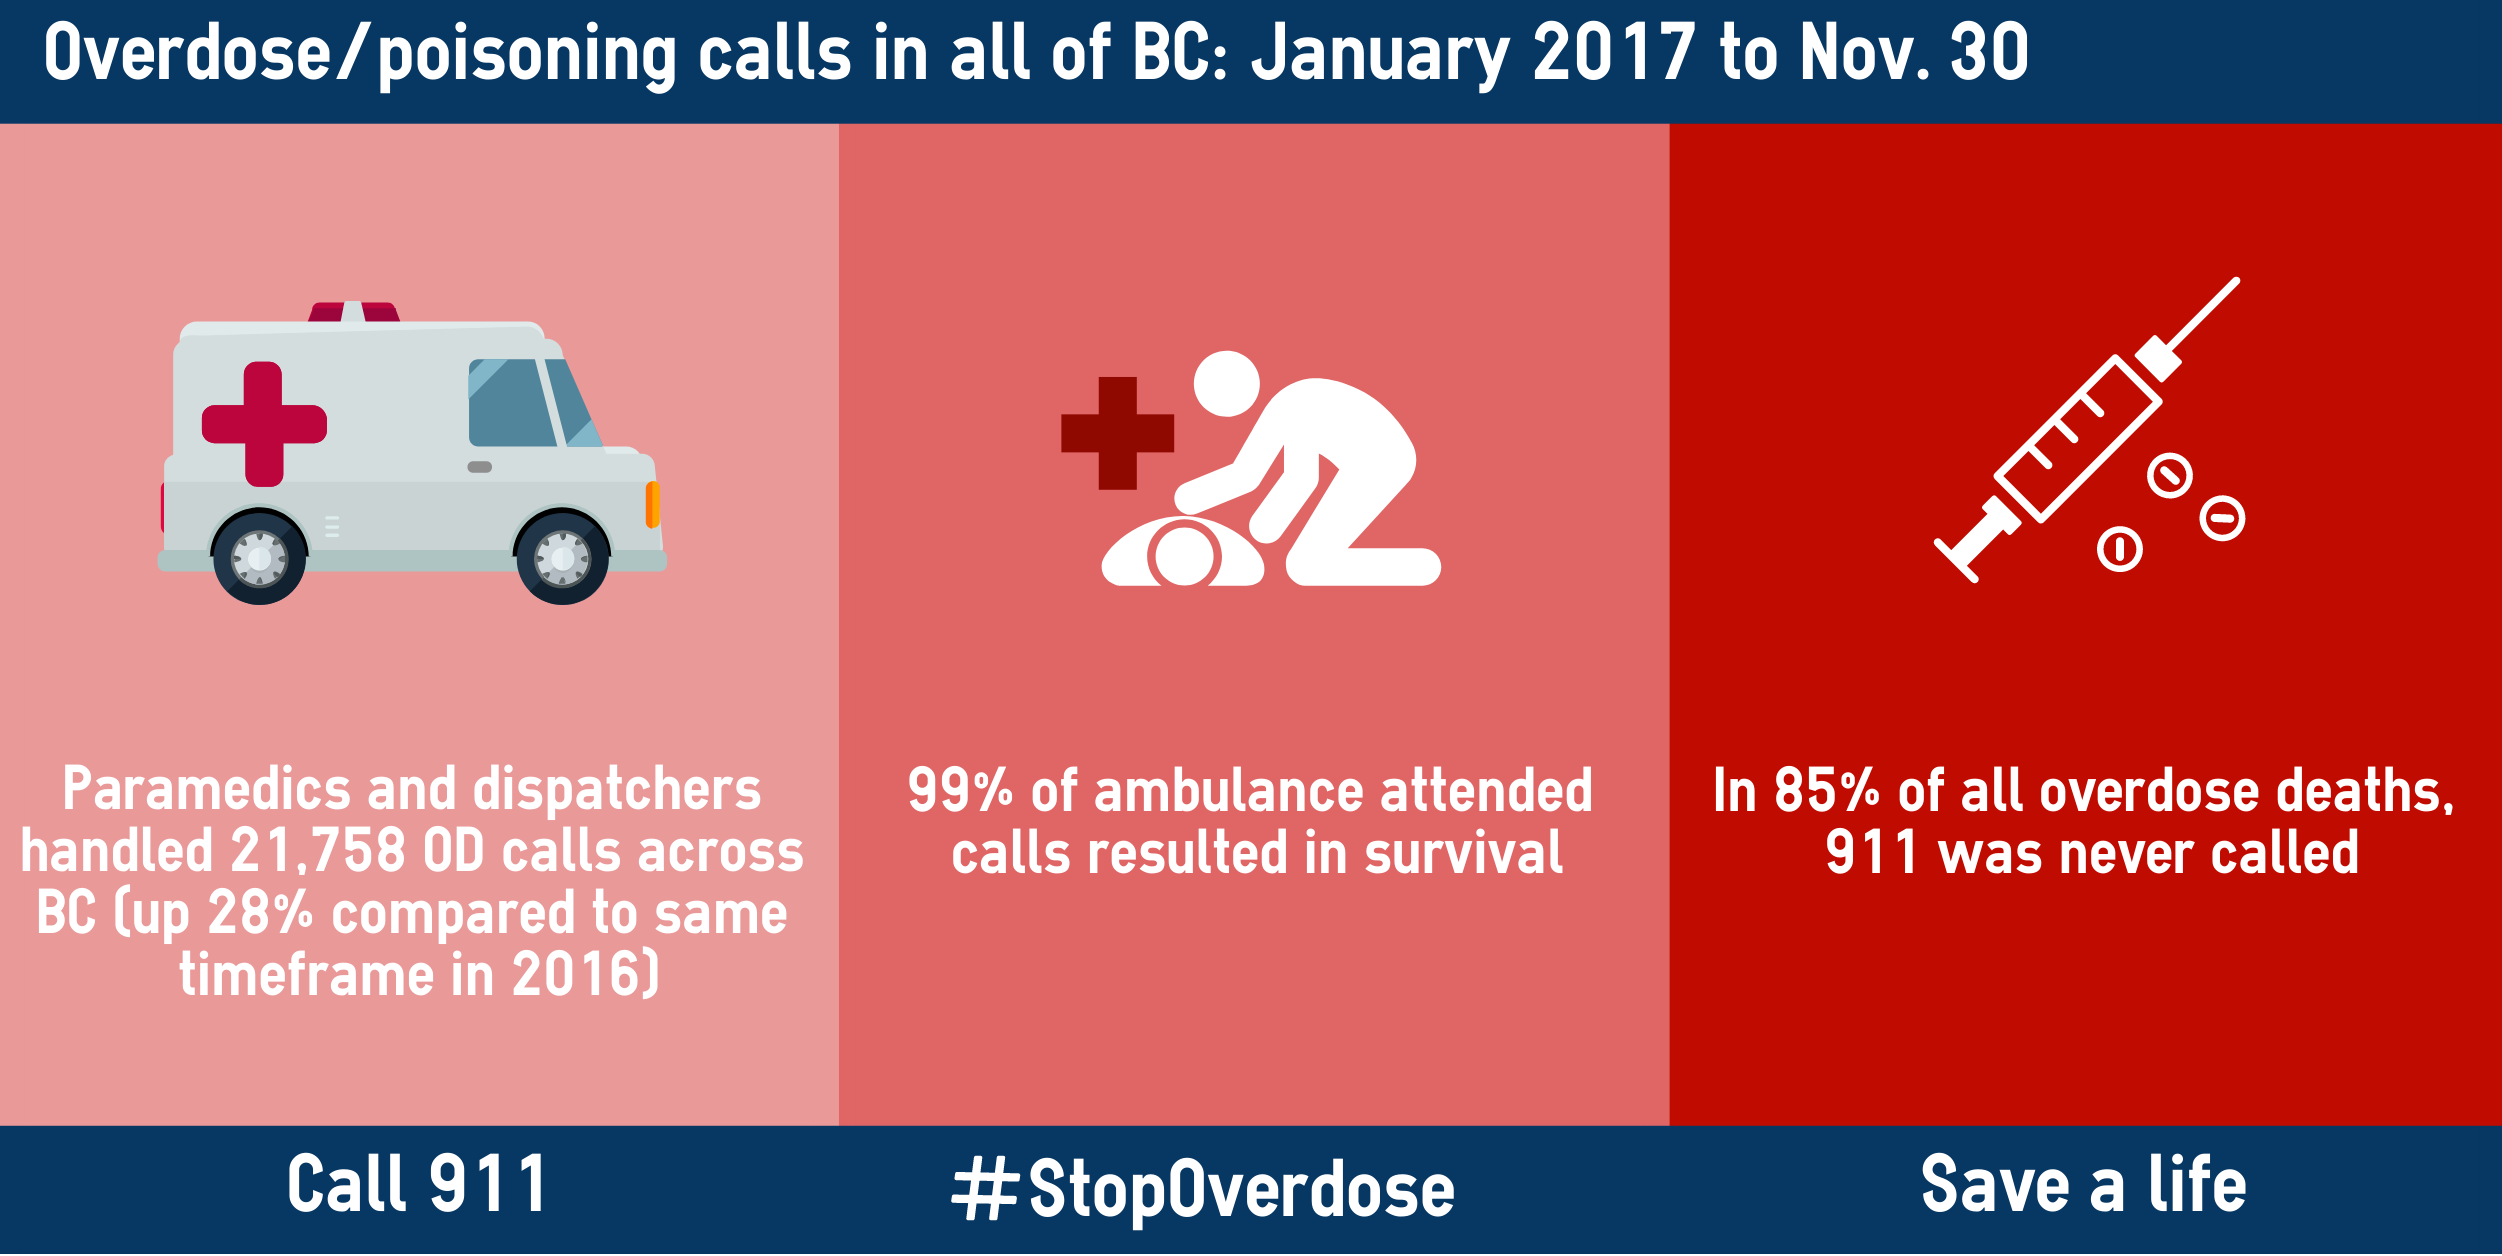 Of 21,758 OD calls across BC from Jan to Nov 2017, 99% of ambulance-attended calls resulted in survival.